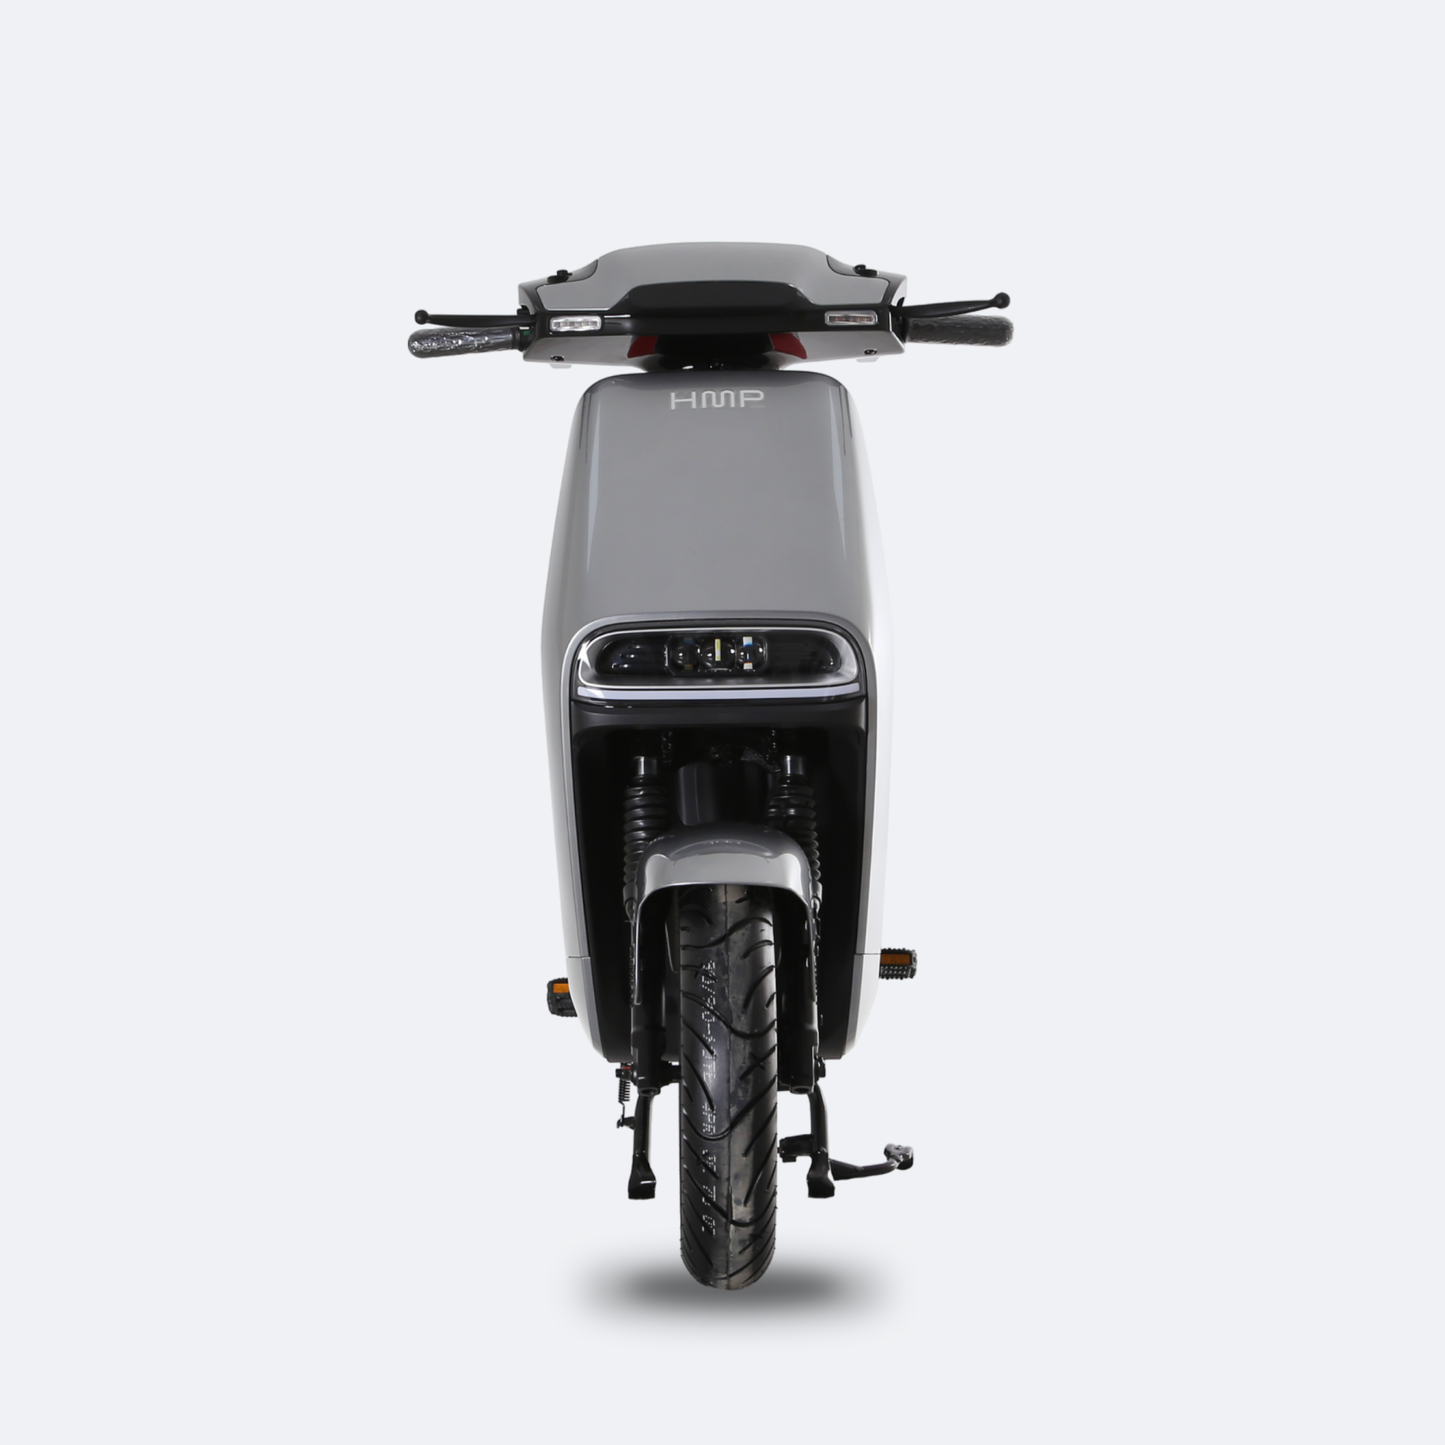 INNO-A 2024 Lithium Battery Moped style Class 2 E-bike